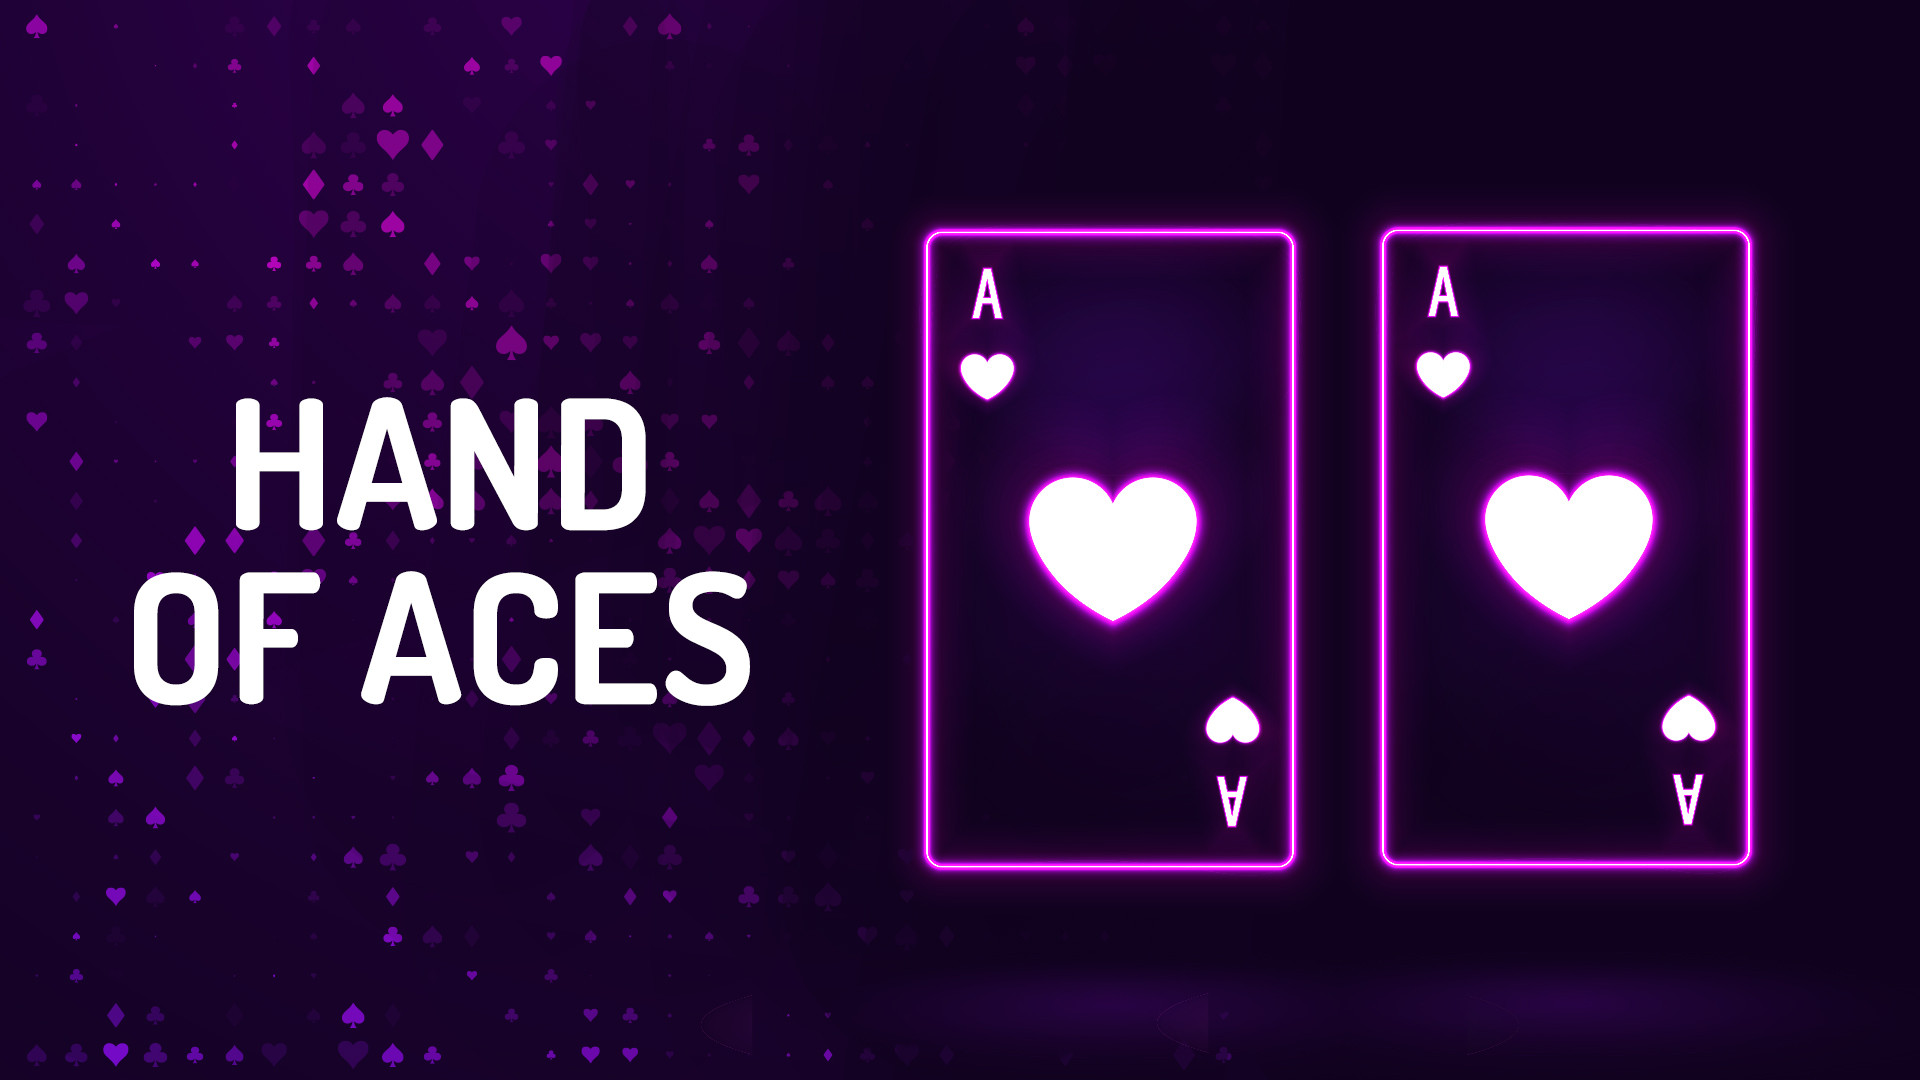 Visualtion of a hand with two aces